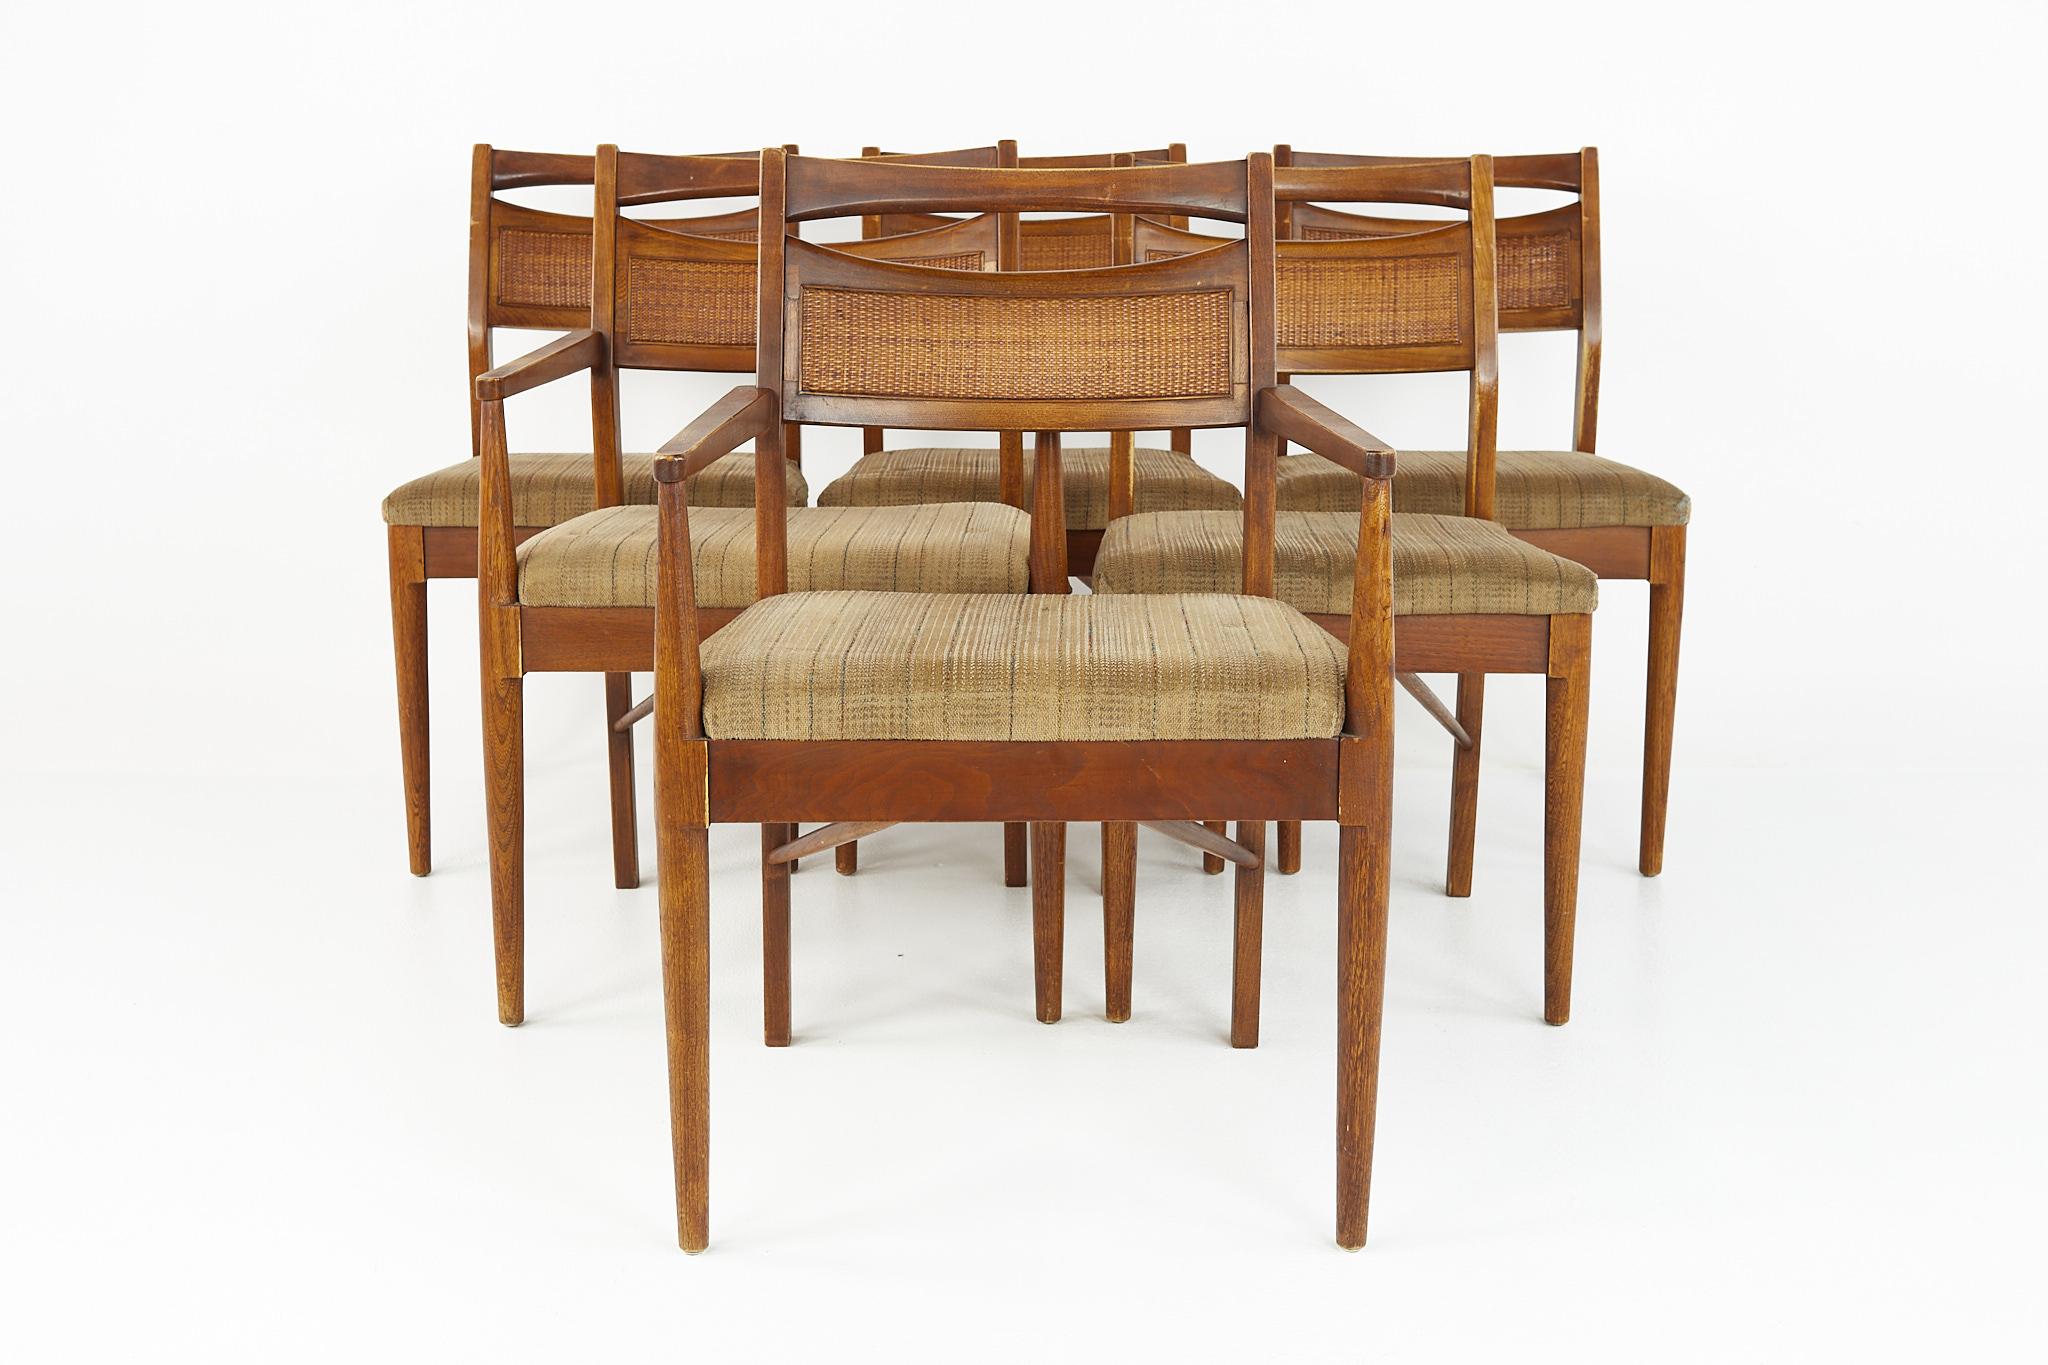 American of Martinsville mid century cane back walnut dining chairs - set of 6

These chairs measure: 18 wide x 17.5 deep x 34 inches high, with a seat height of 18 and arm height of 26 inches 

?All pieces of furniture can be had in what we